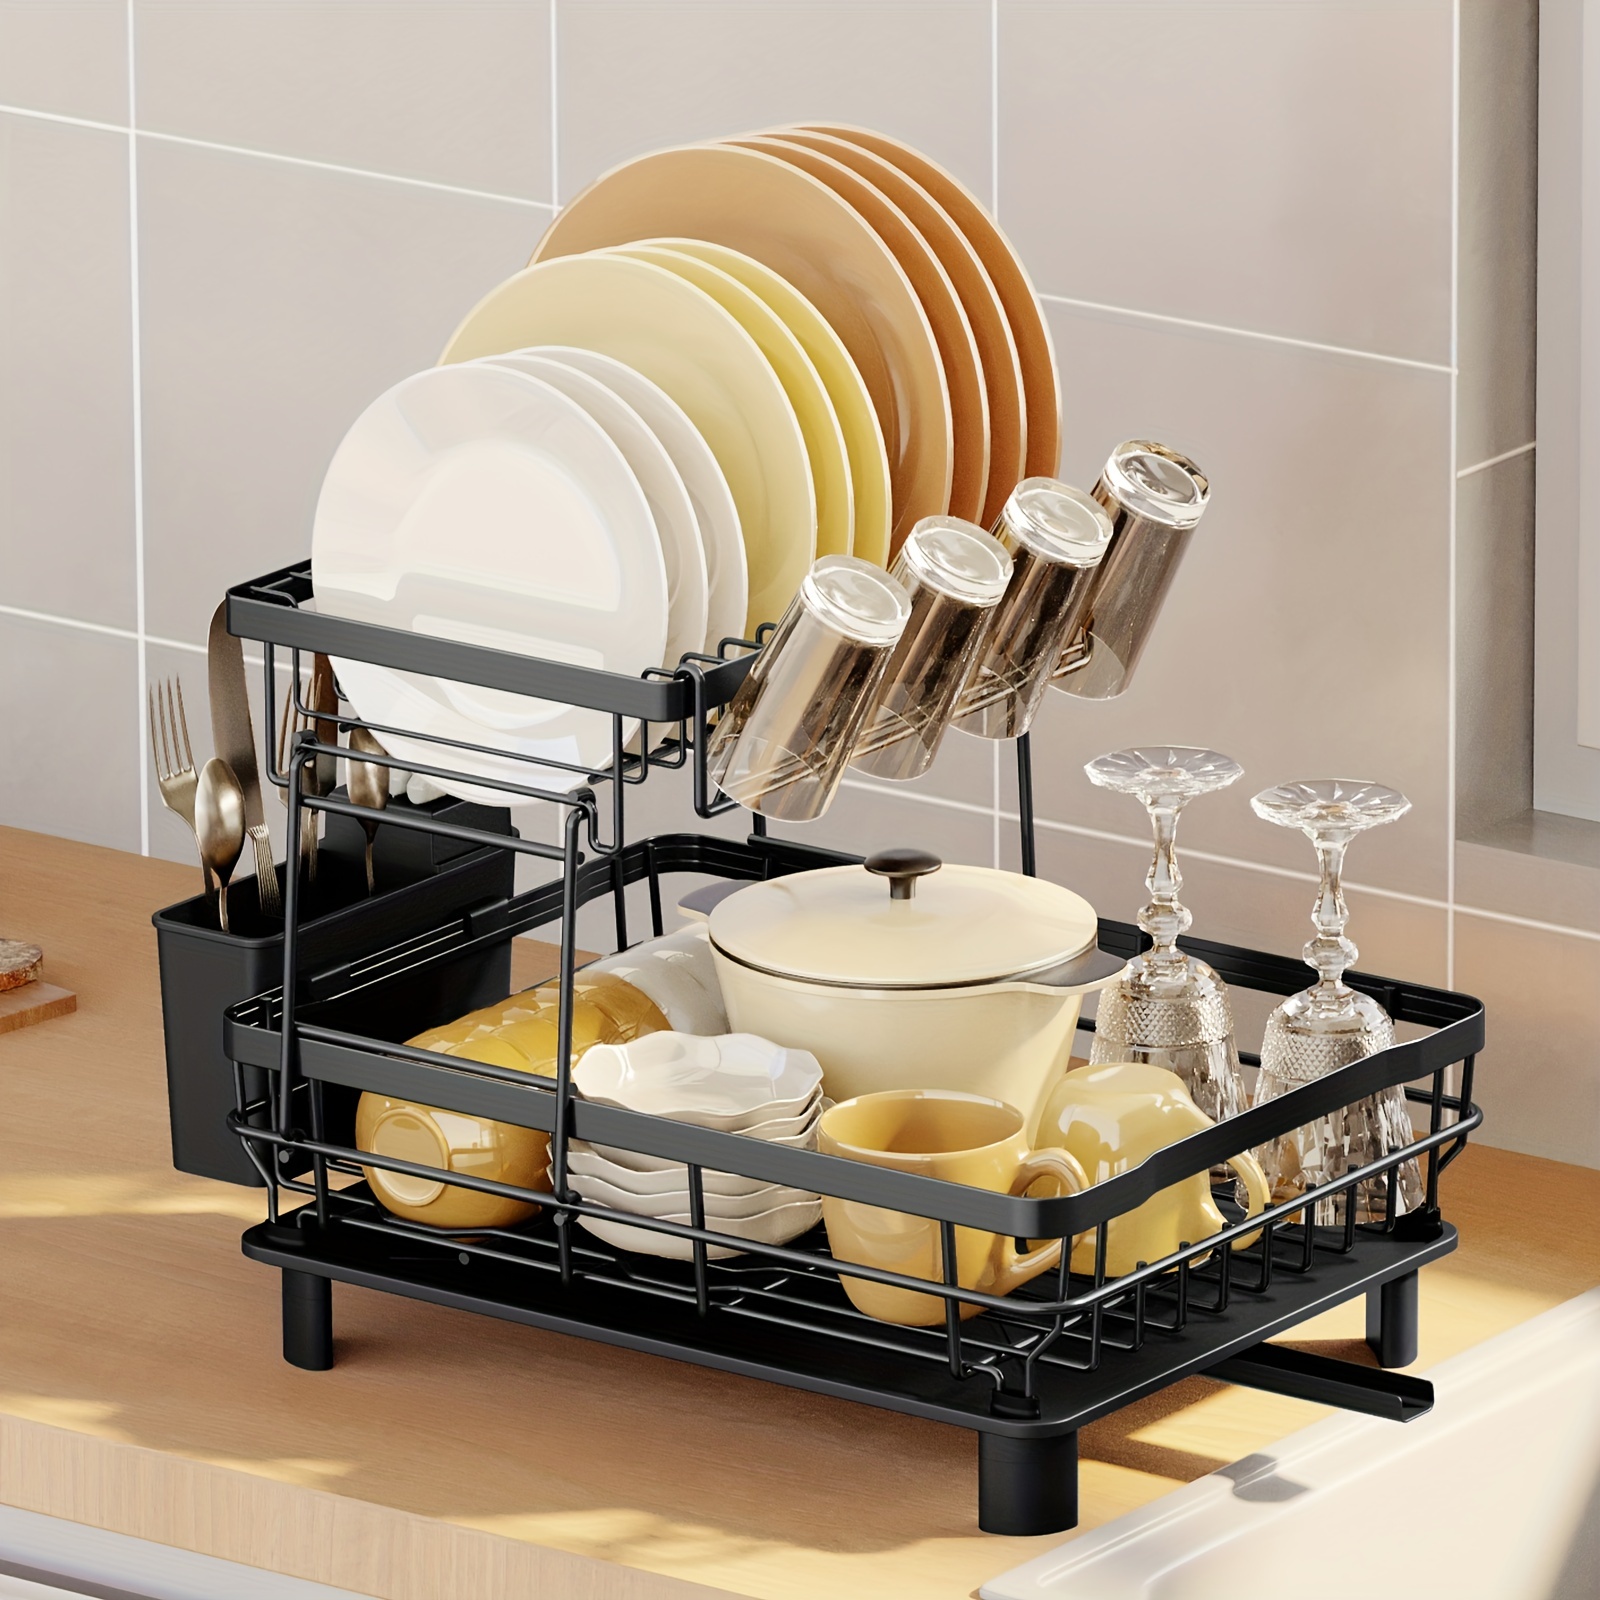 Dish Drying Rack For Kitchen Counter, 2-tier Rust-proof Dish